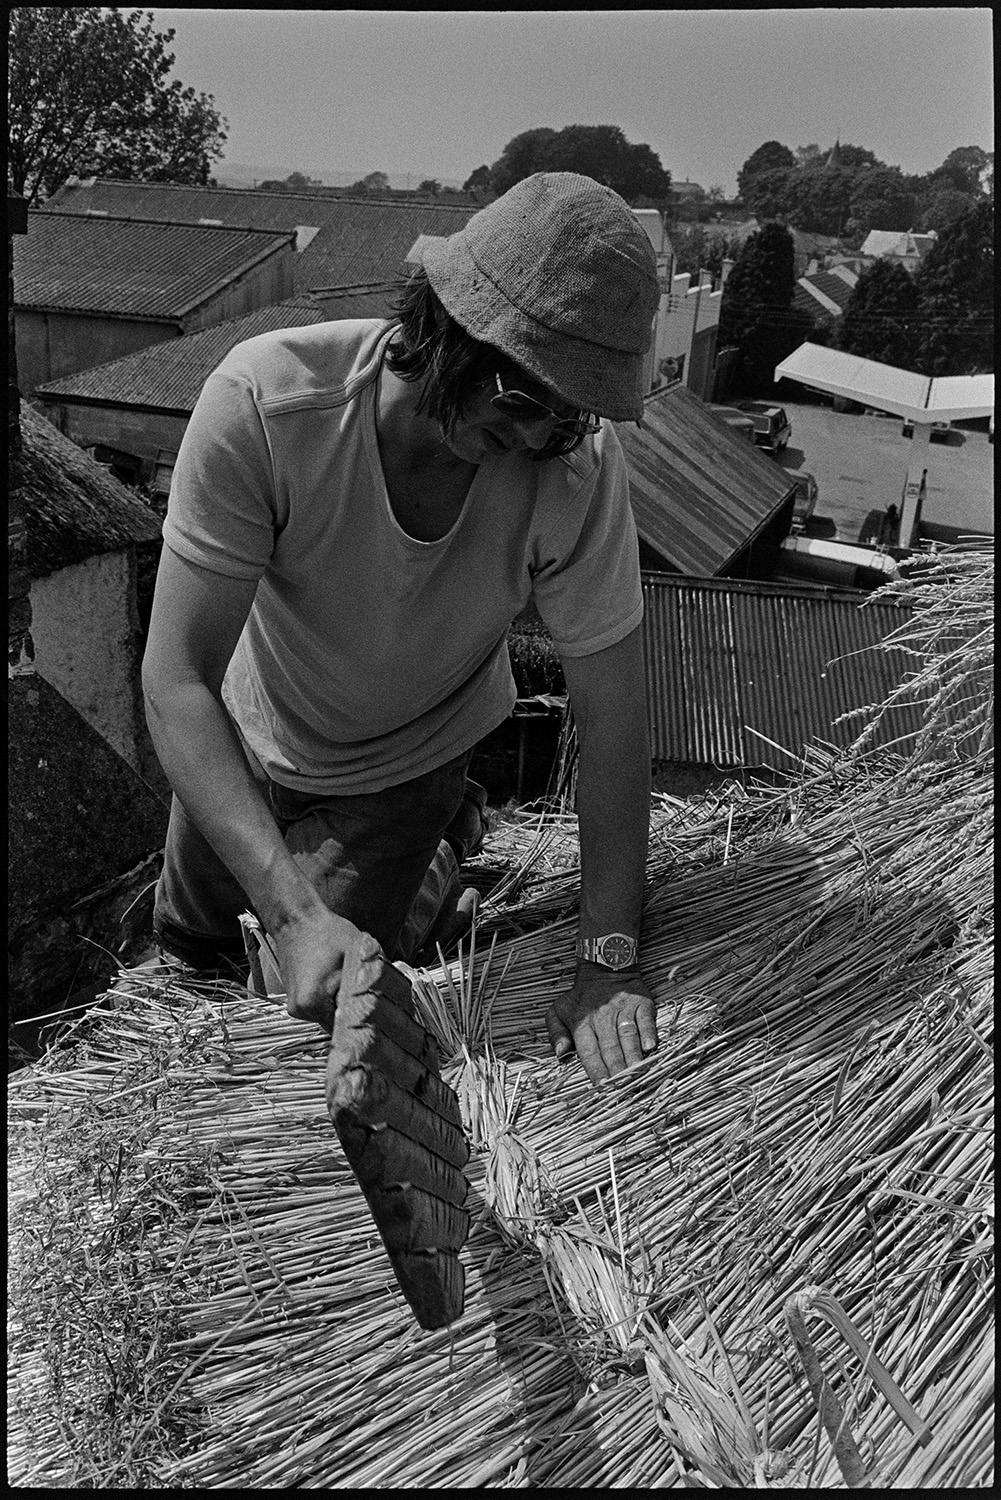 Thatcher thatching, taken from top of roof. 
[Nigel Gard thatching a roof in Beaford. He is using a wooden tool. The image is taken from the rooftop and other roofs can be seen in the background.]